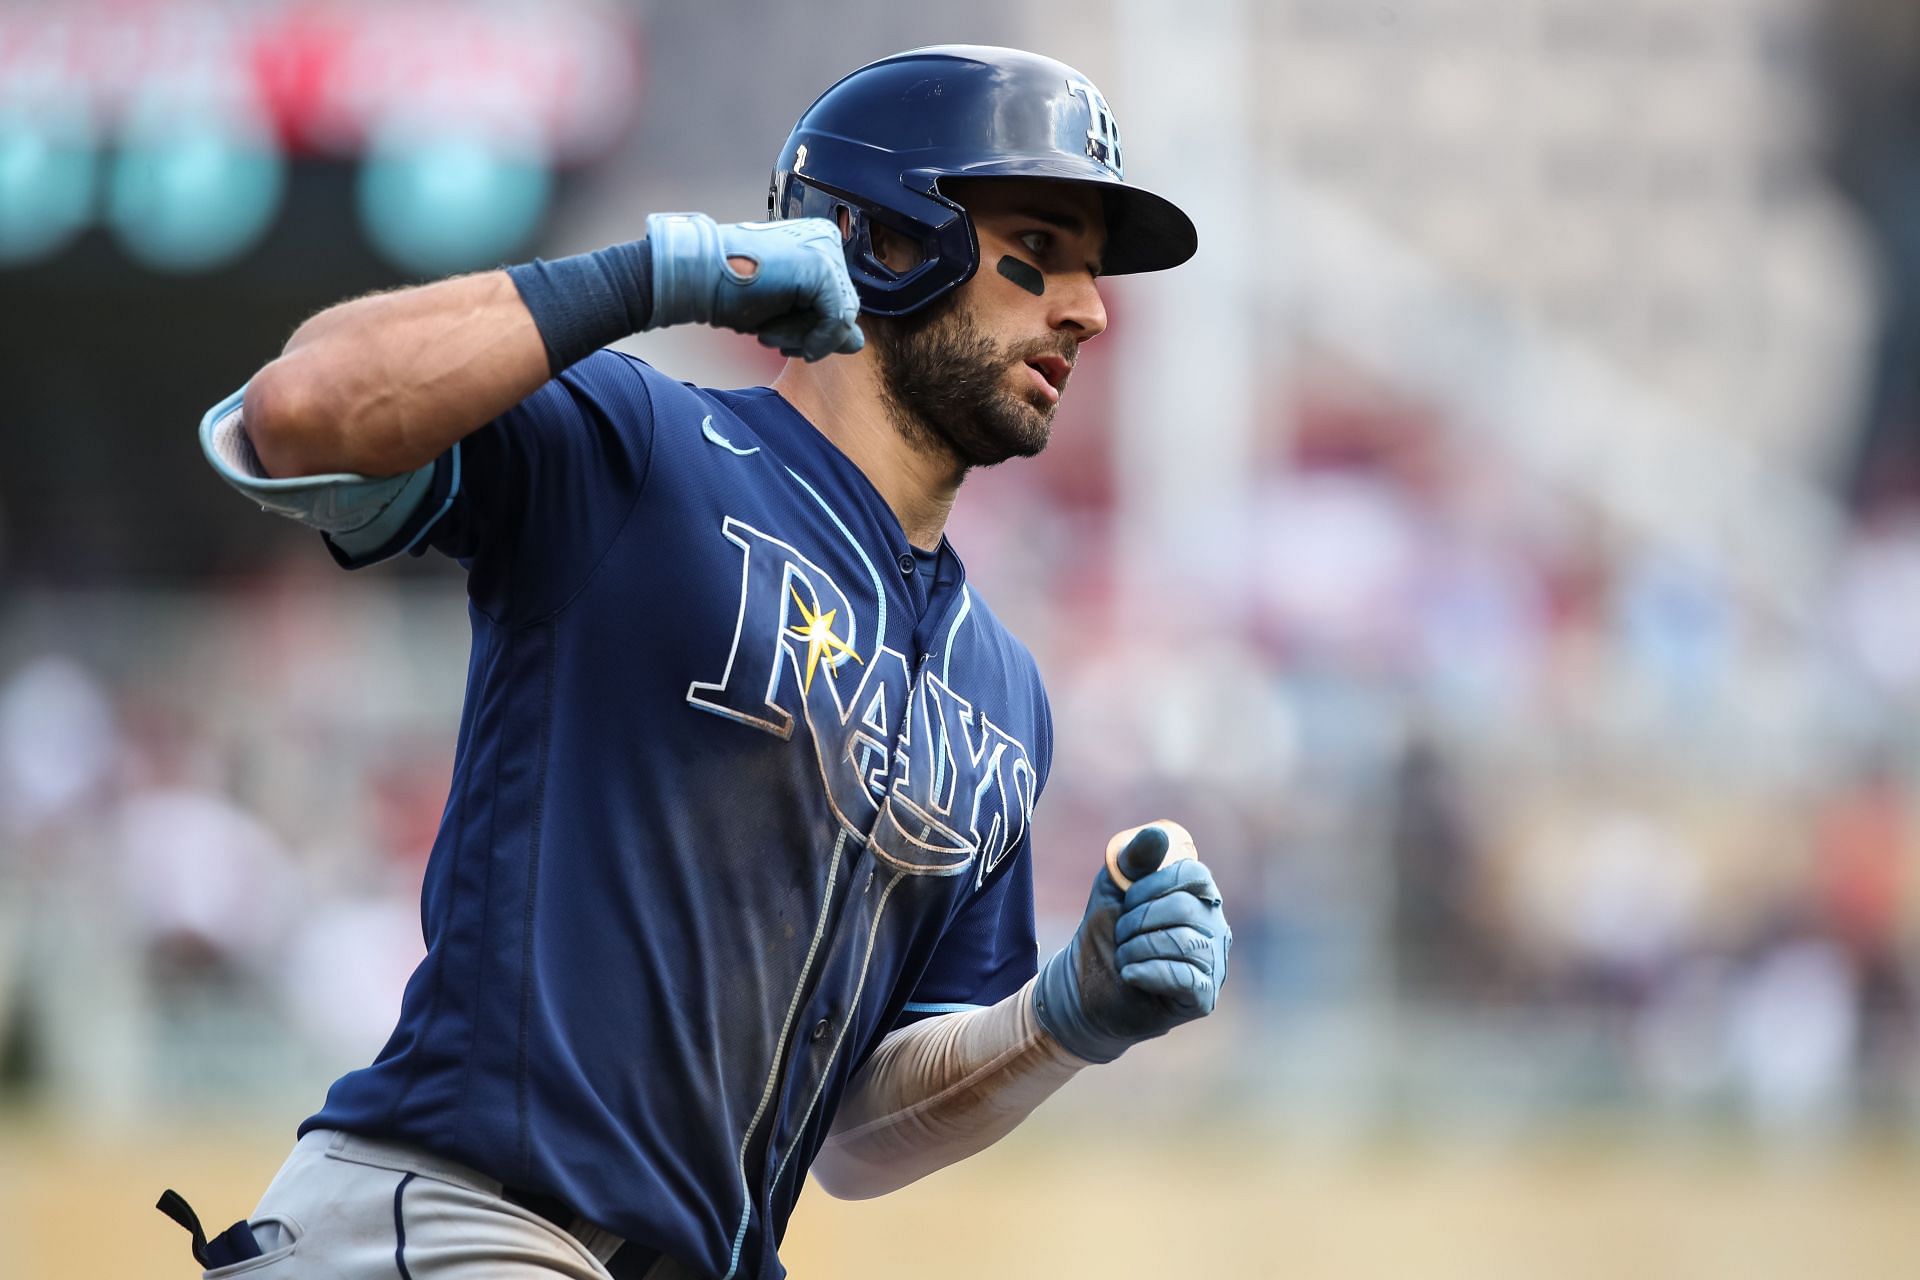 Kevin Kiermaier excited to show Blue Jays that defense matters